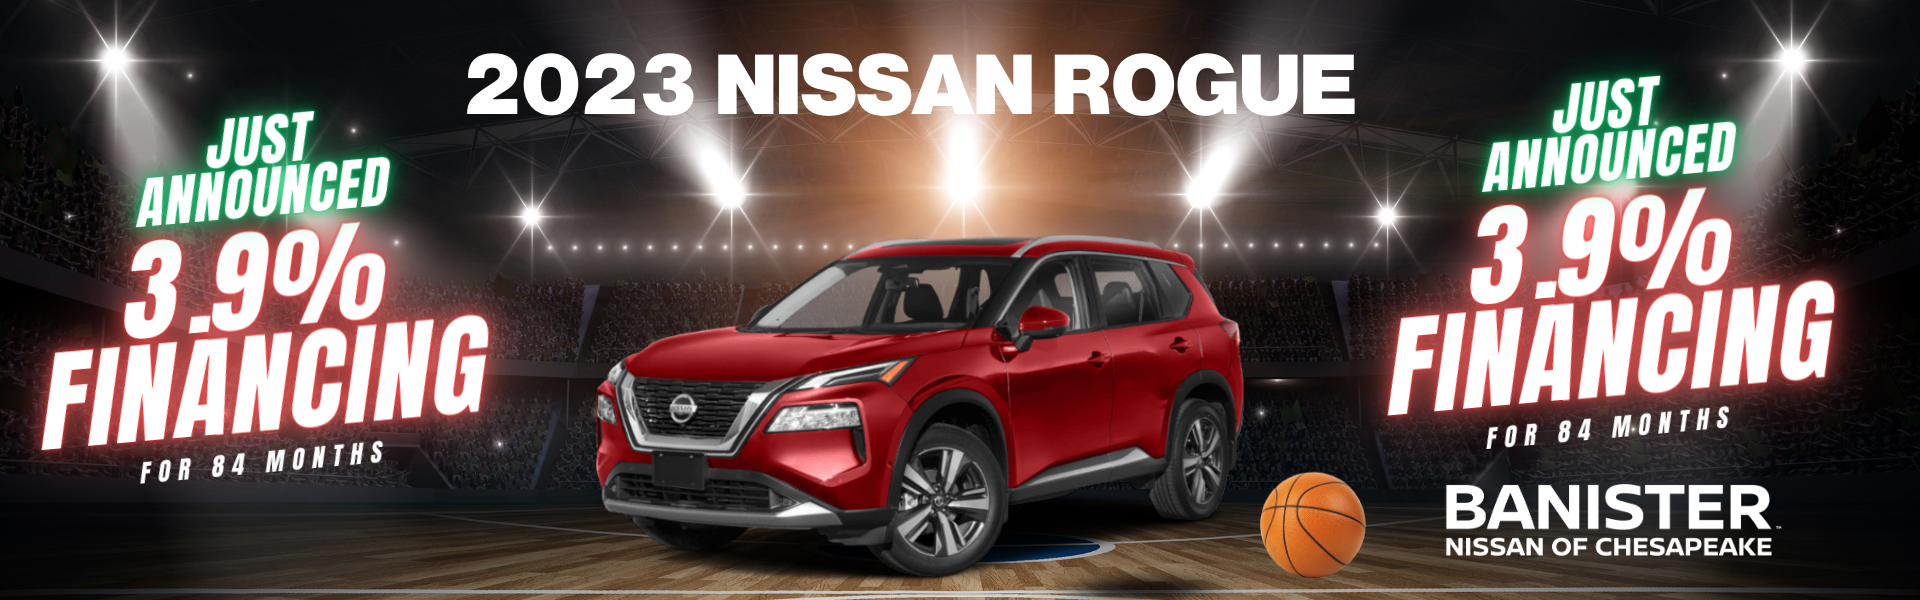 Rogue Special at Banister Nissan of Chesapeake